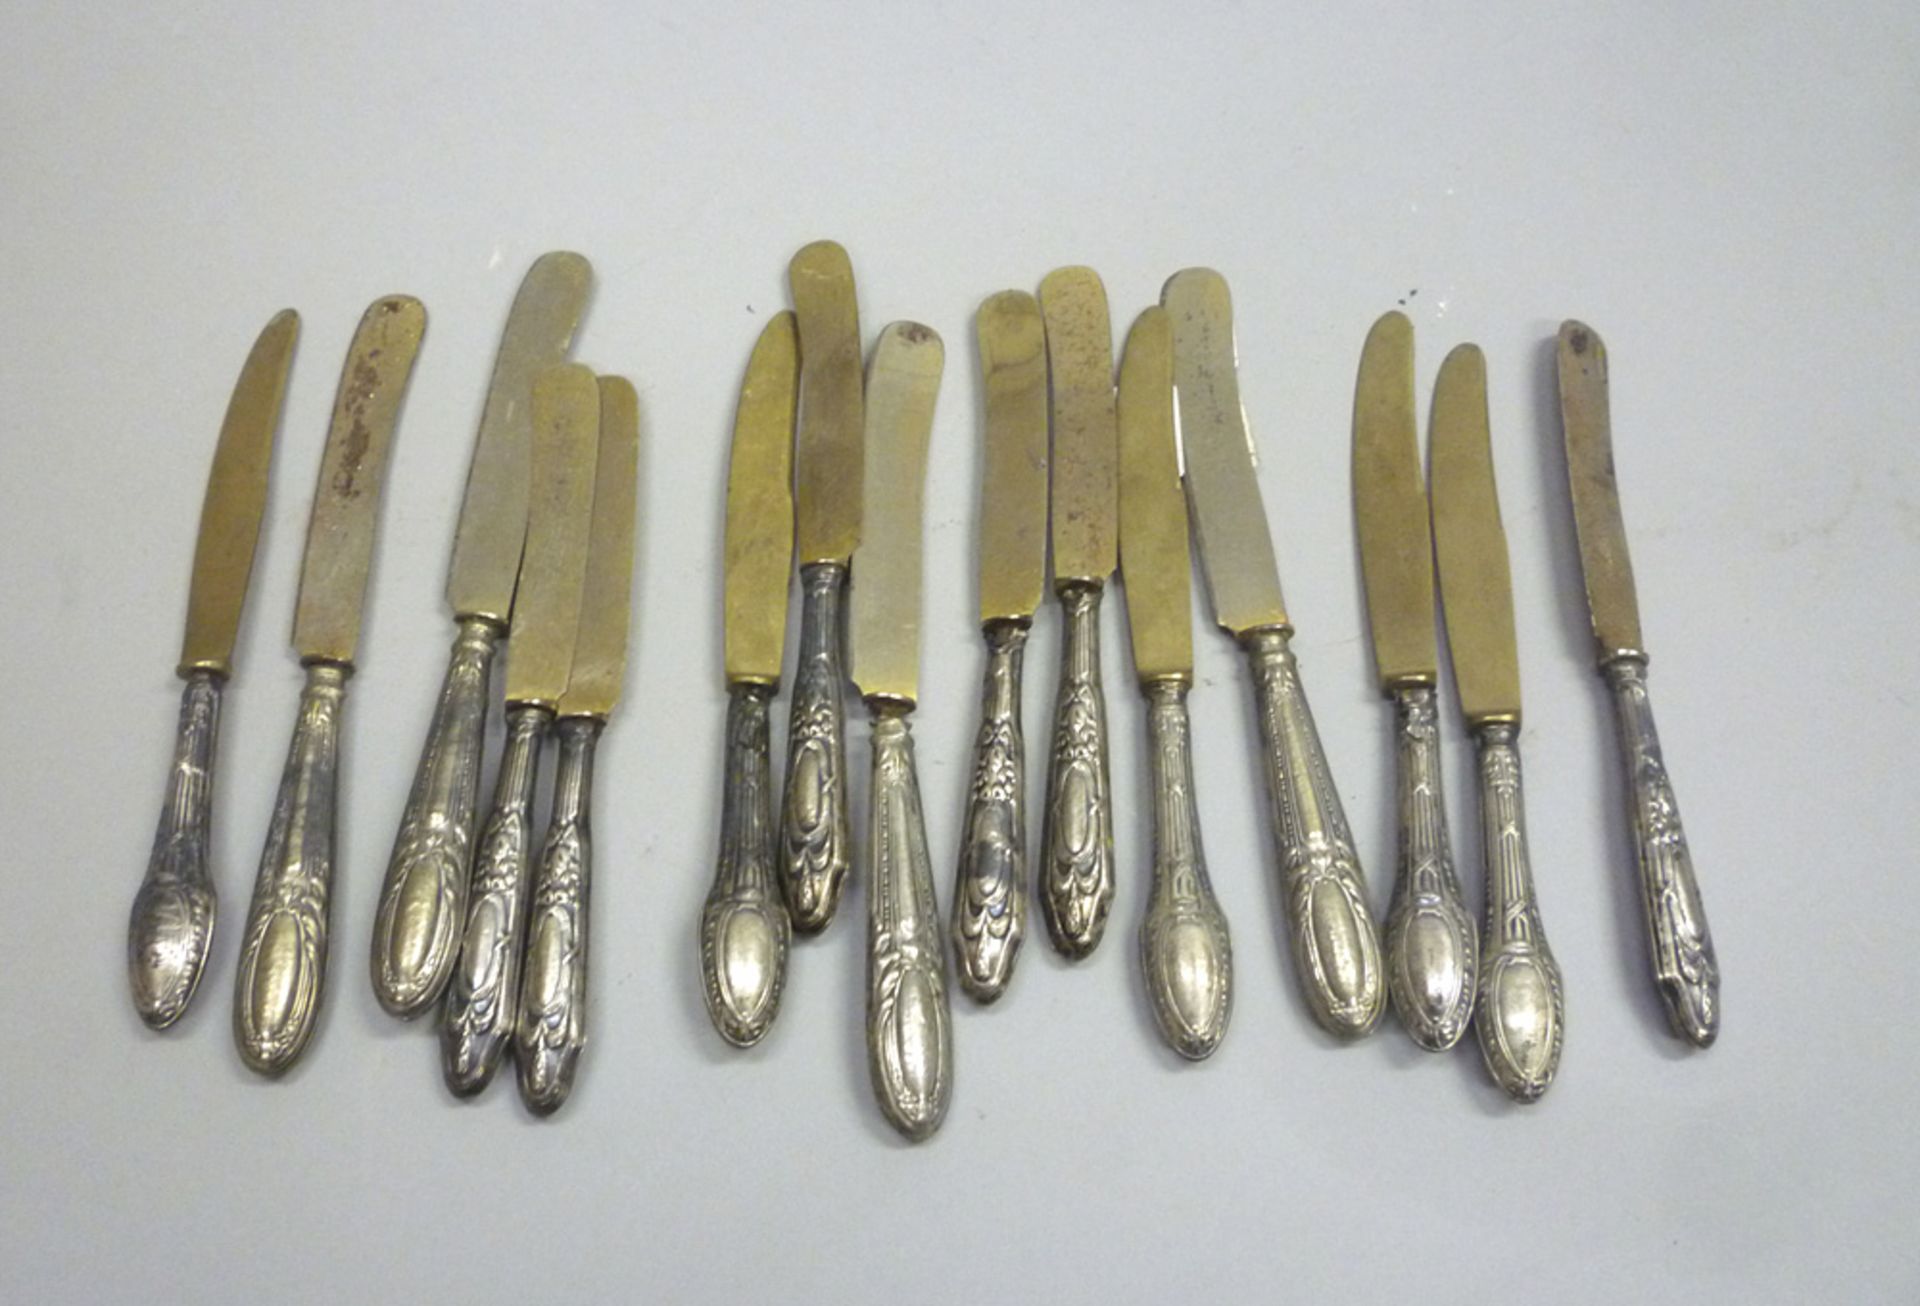 FIFTEEN SILVER KNIVES, 20TH CENTURY